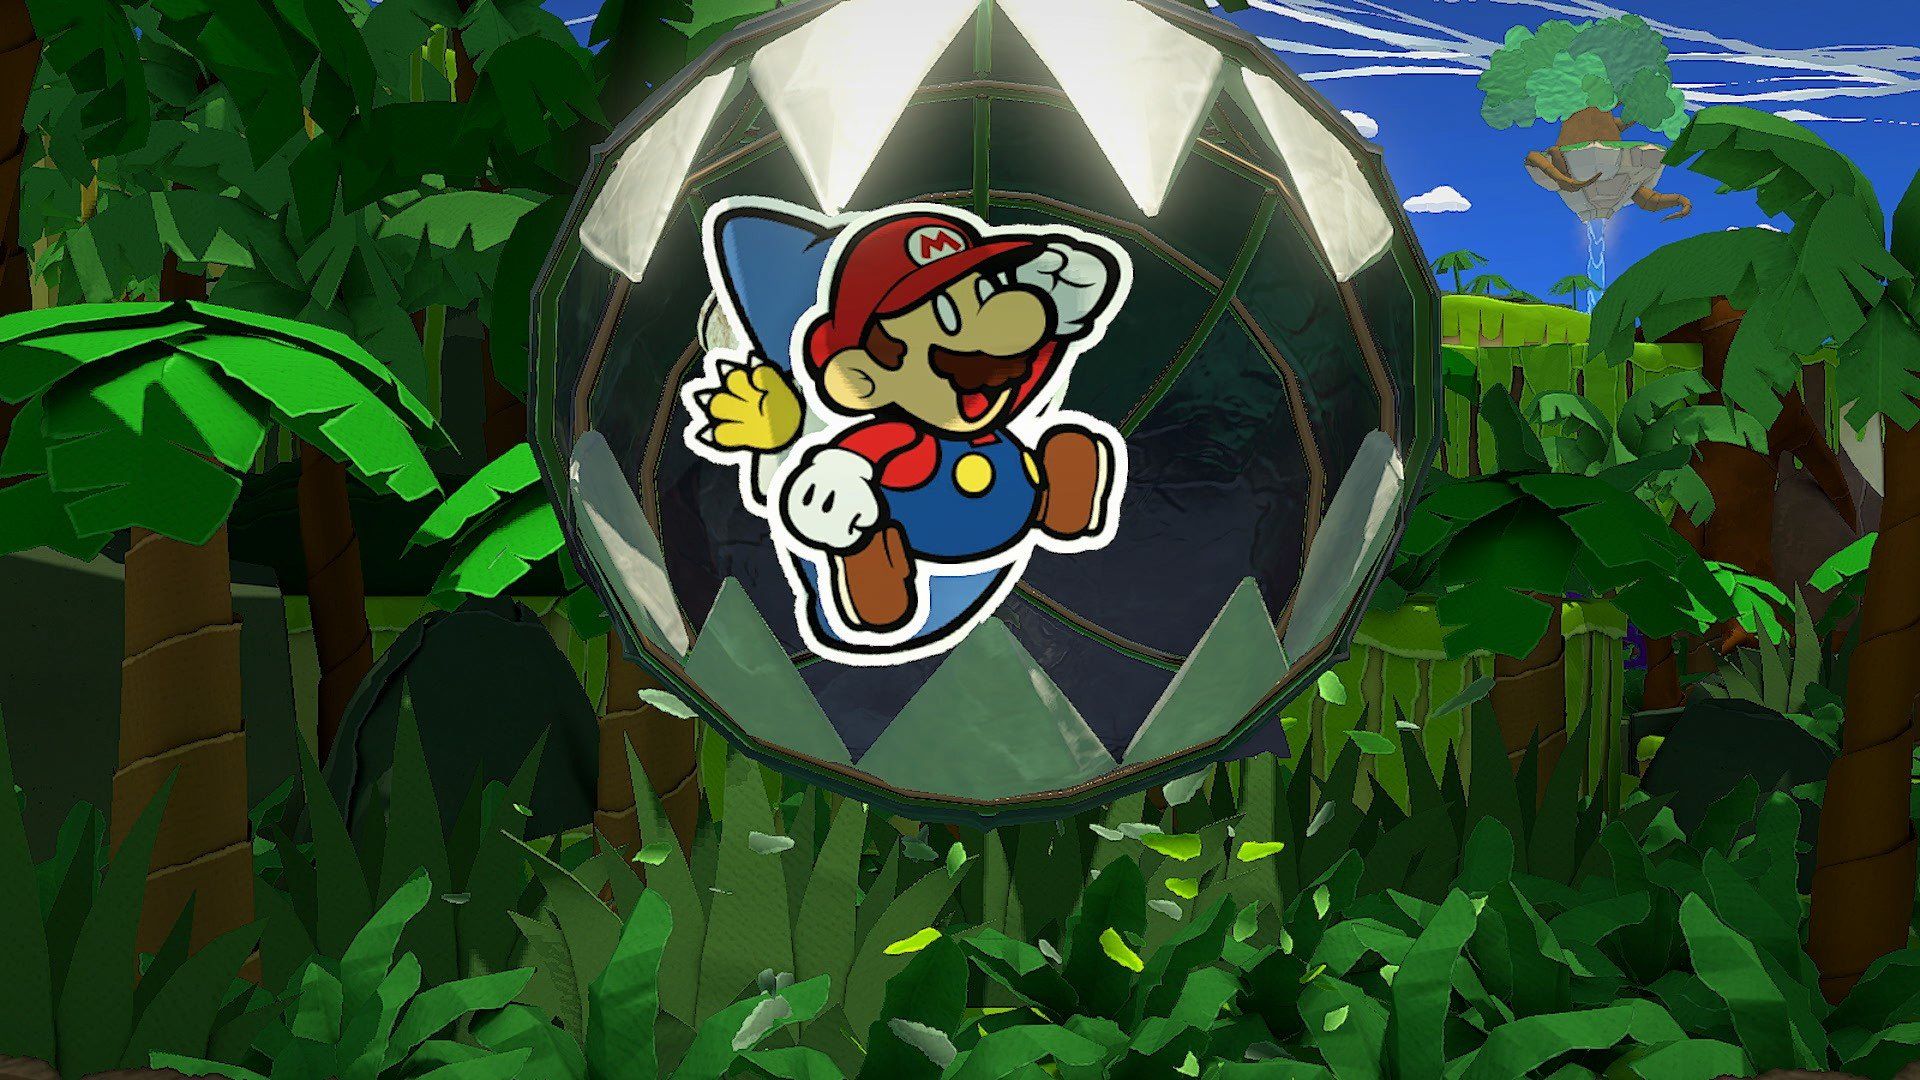 Gallery: Paper Mario: The Origami King Gorgeous Screenshots